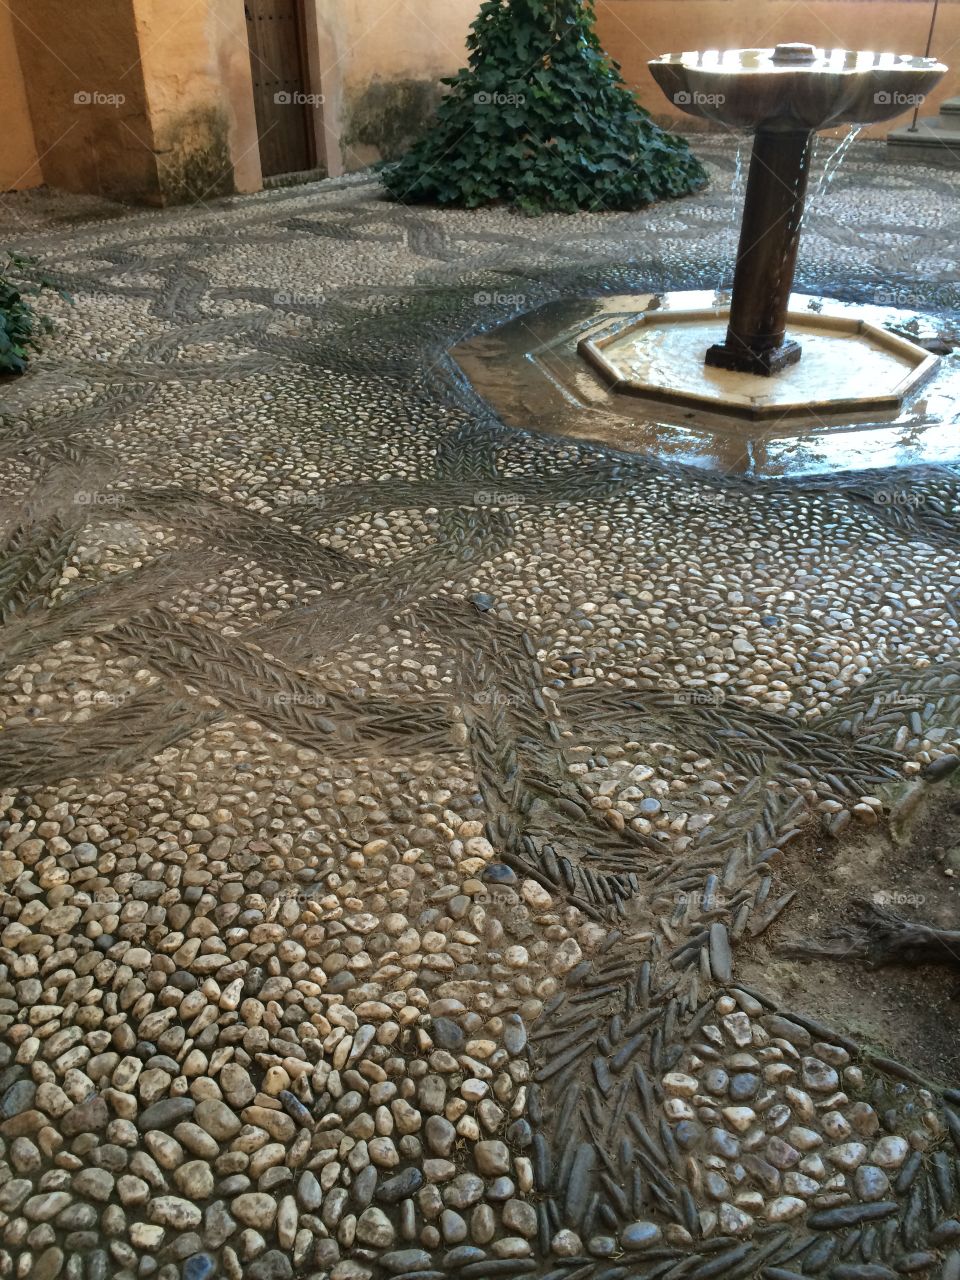 Rocks and stones design on the floor in Alhambra